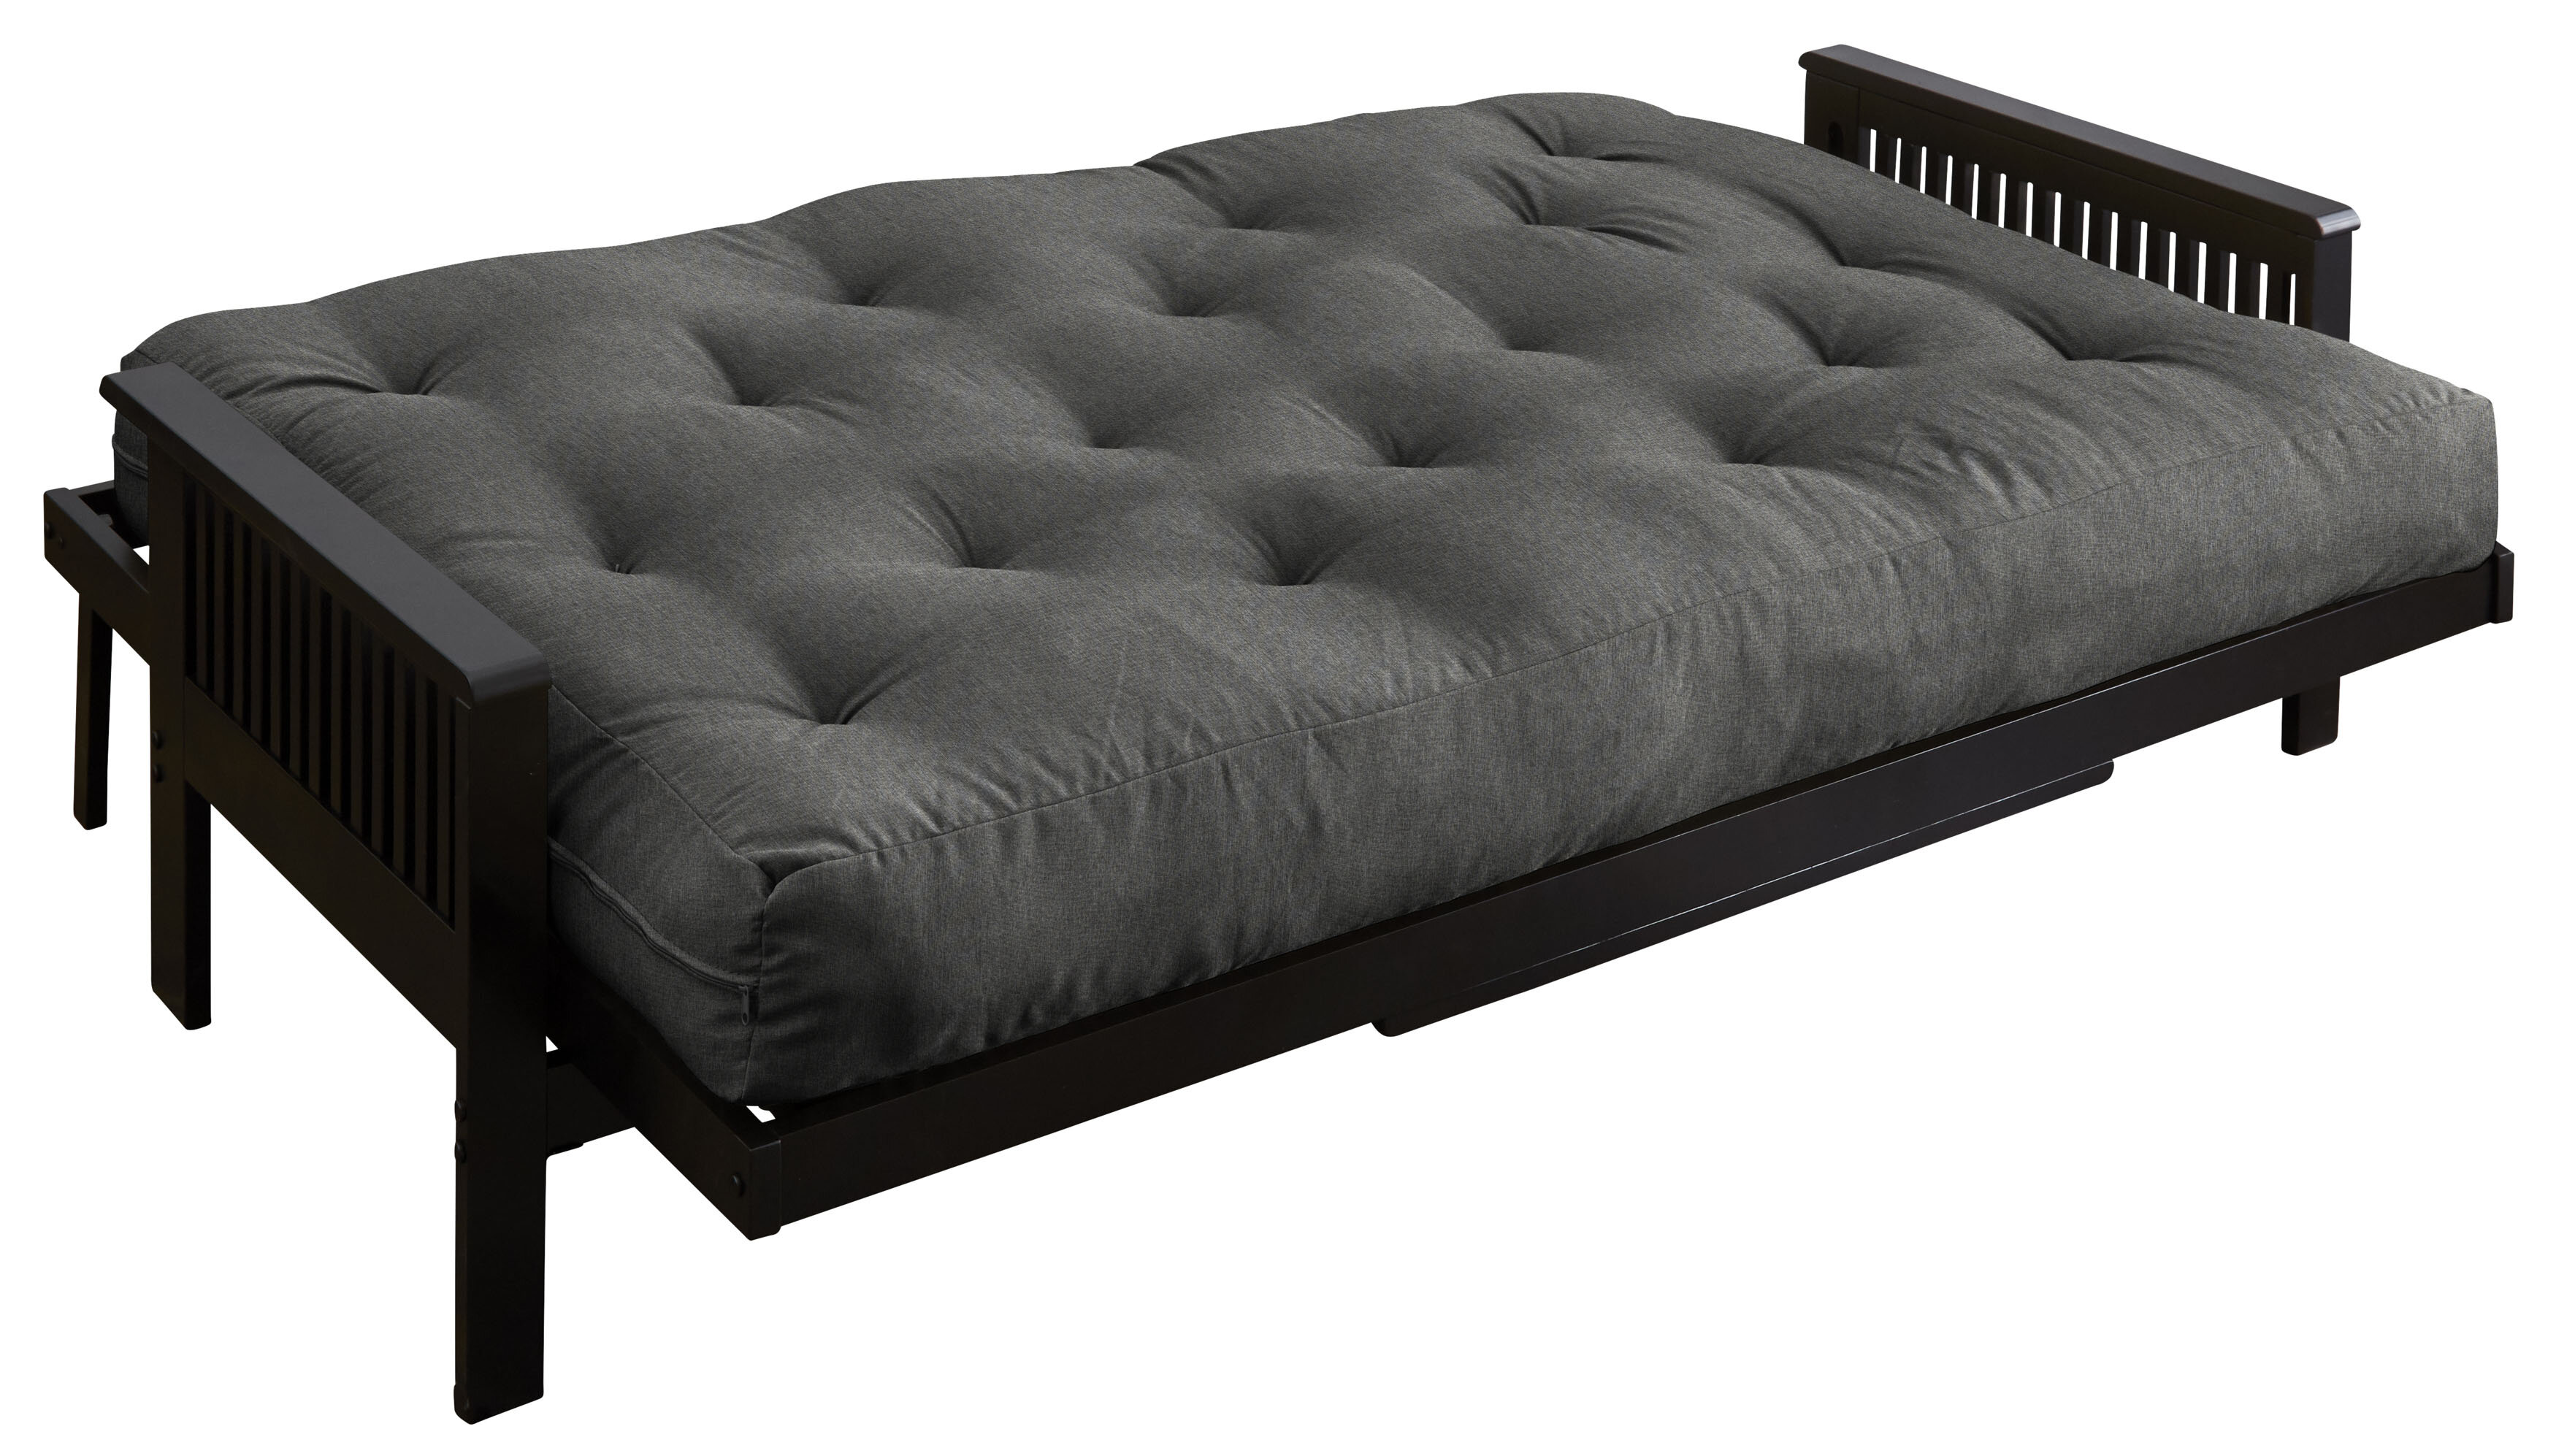 Lorain Full 75 Wide Tufted Back Futon and Mattress Foundstone Fabric: Suede Gray Polyester